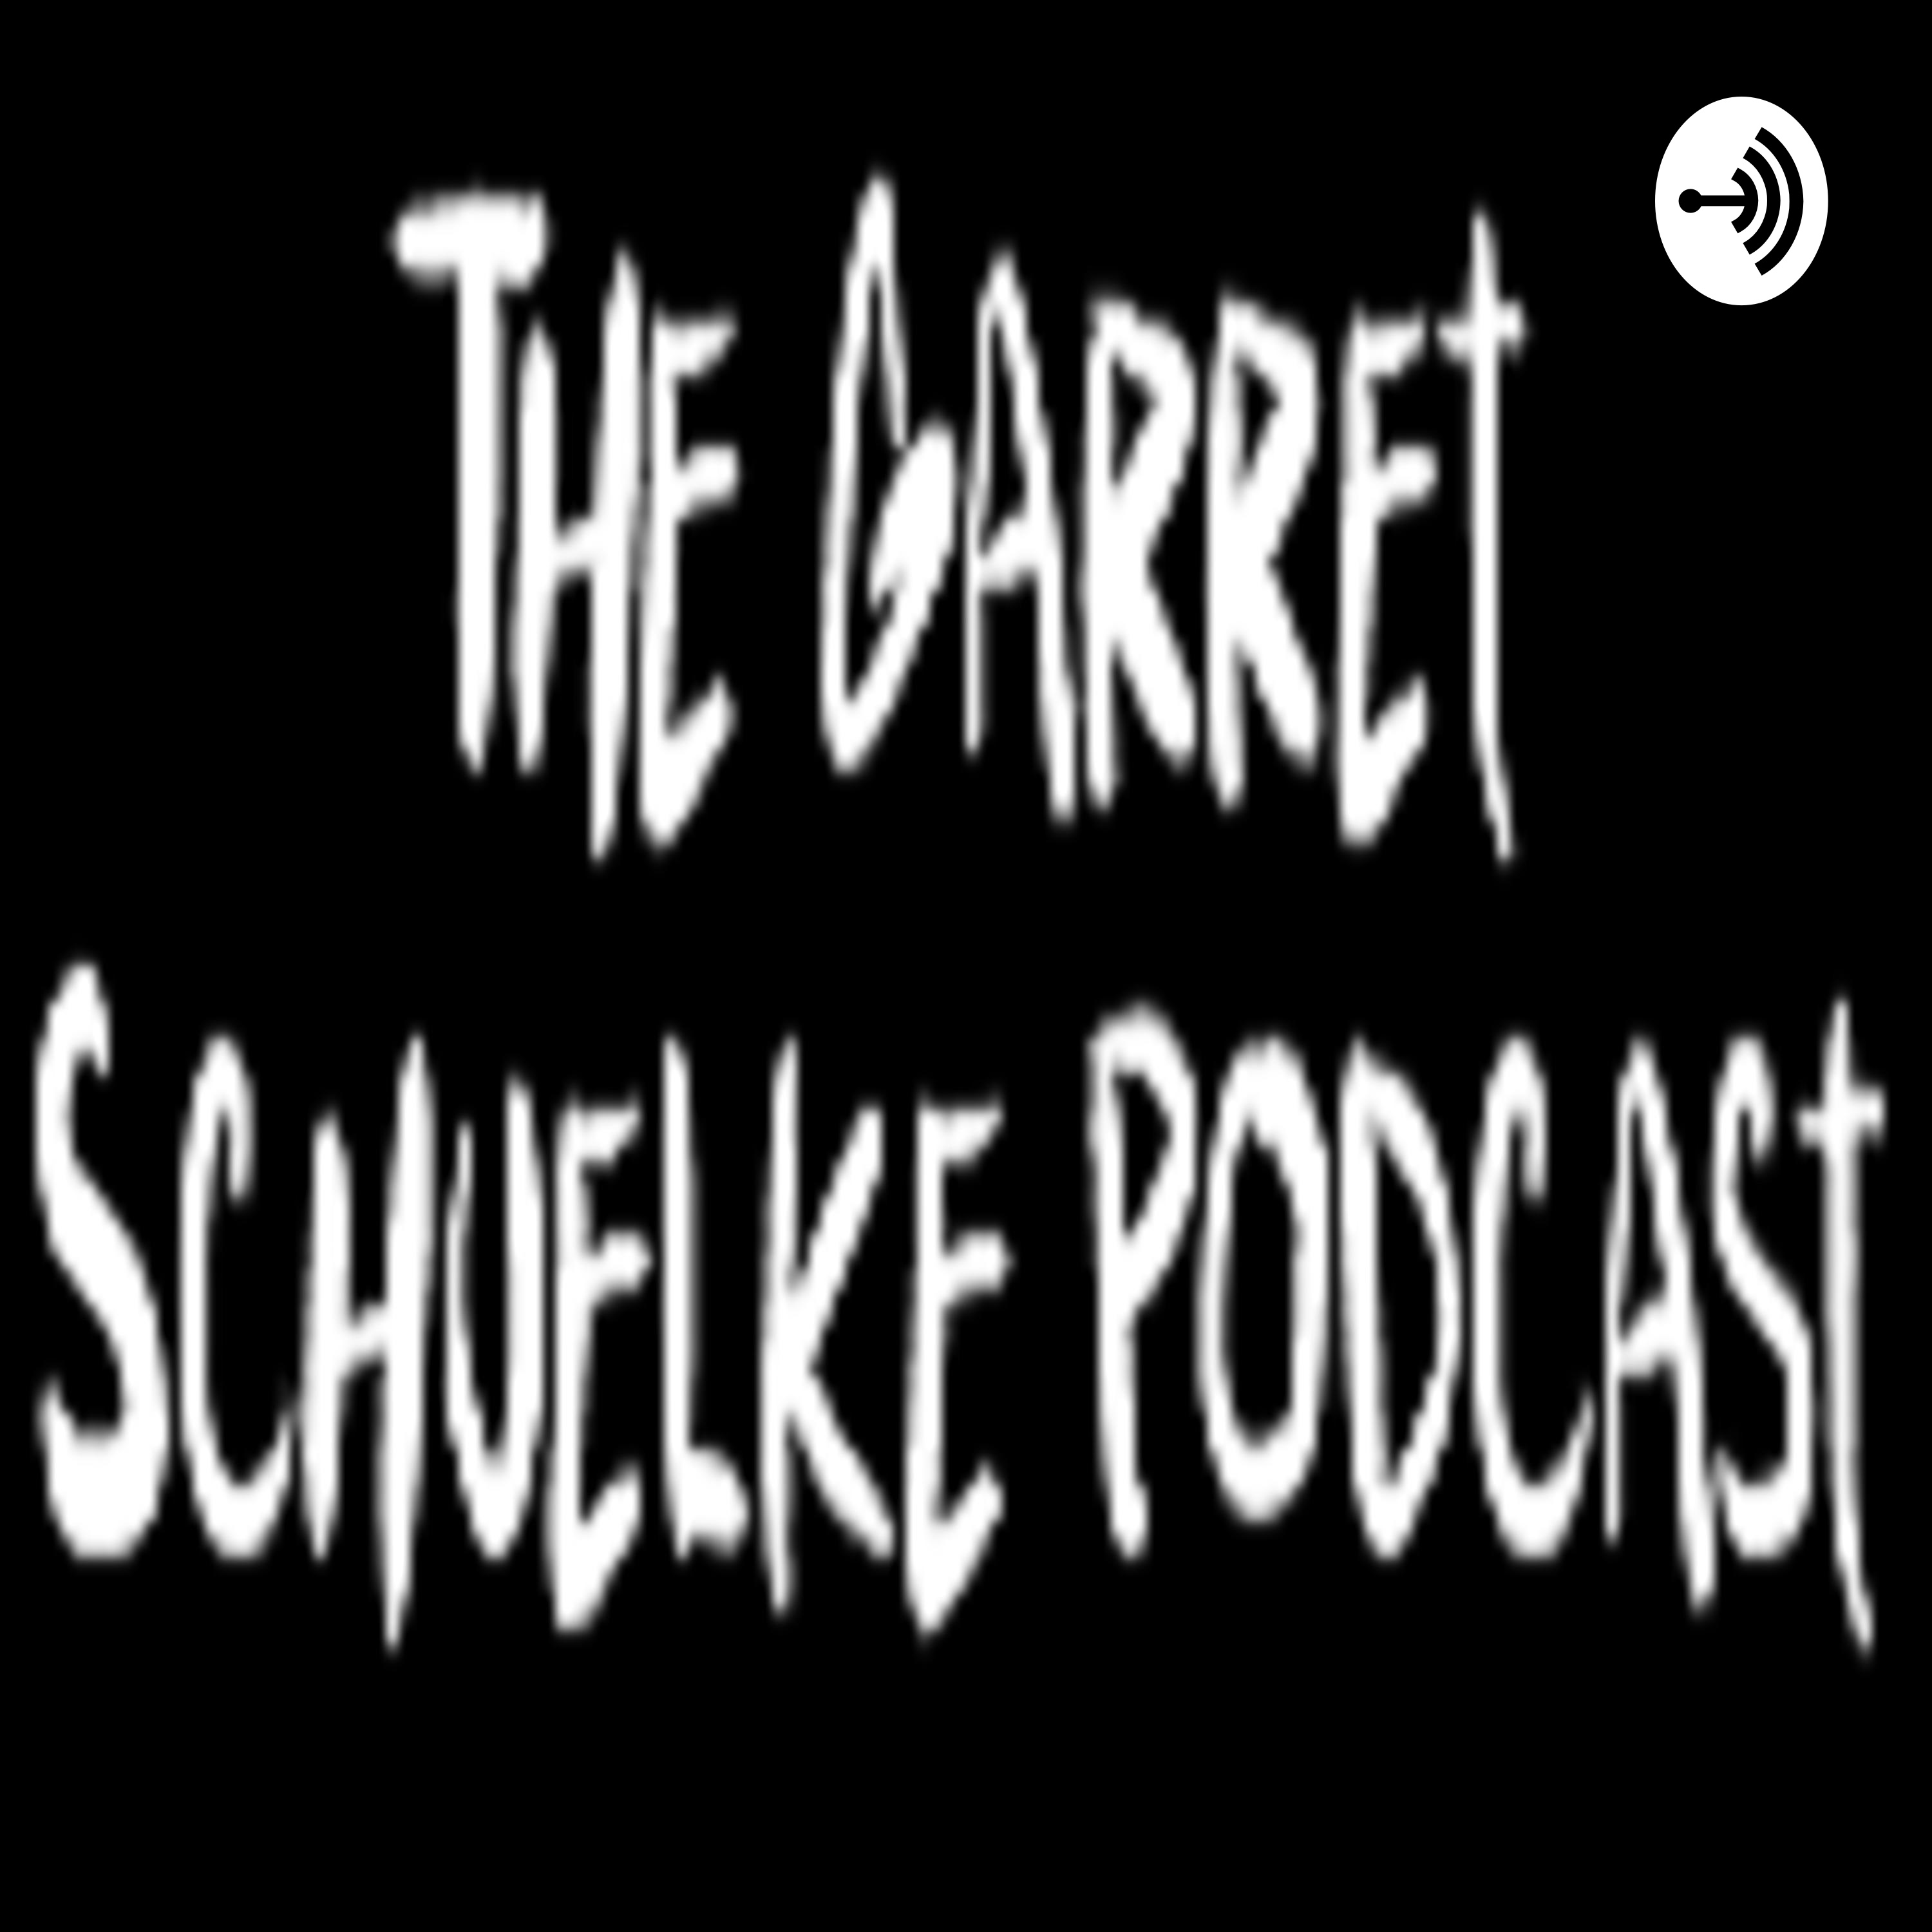 The Garret Schuelke Podcast Episode 32: What a Wonderful World We Live In with Louis Rive